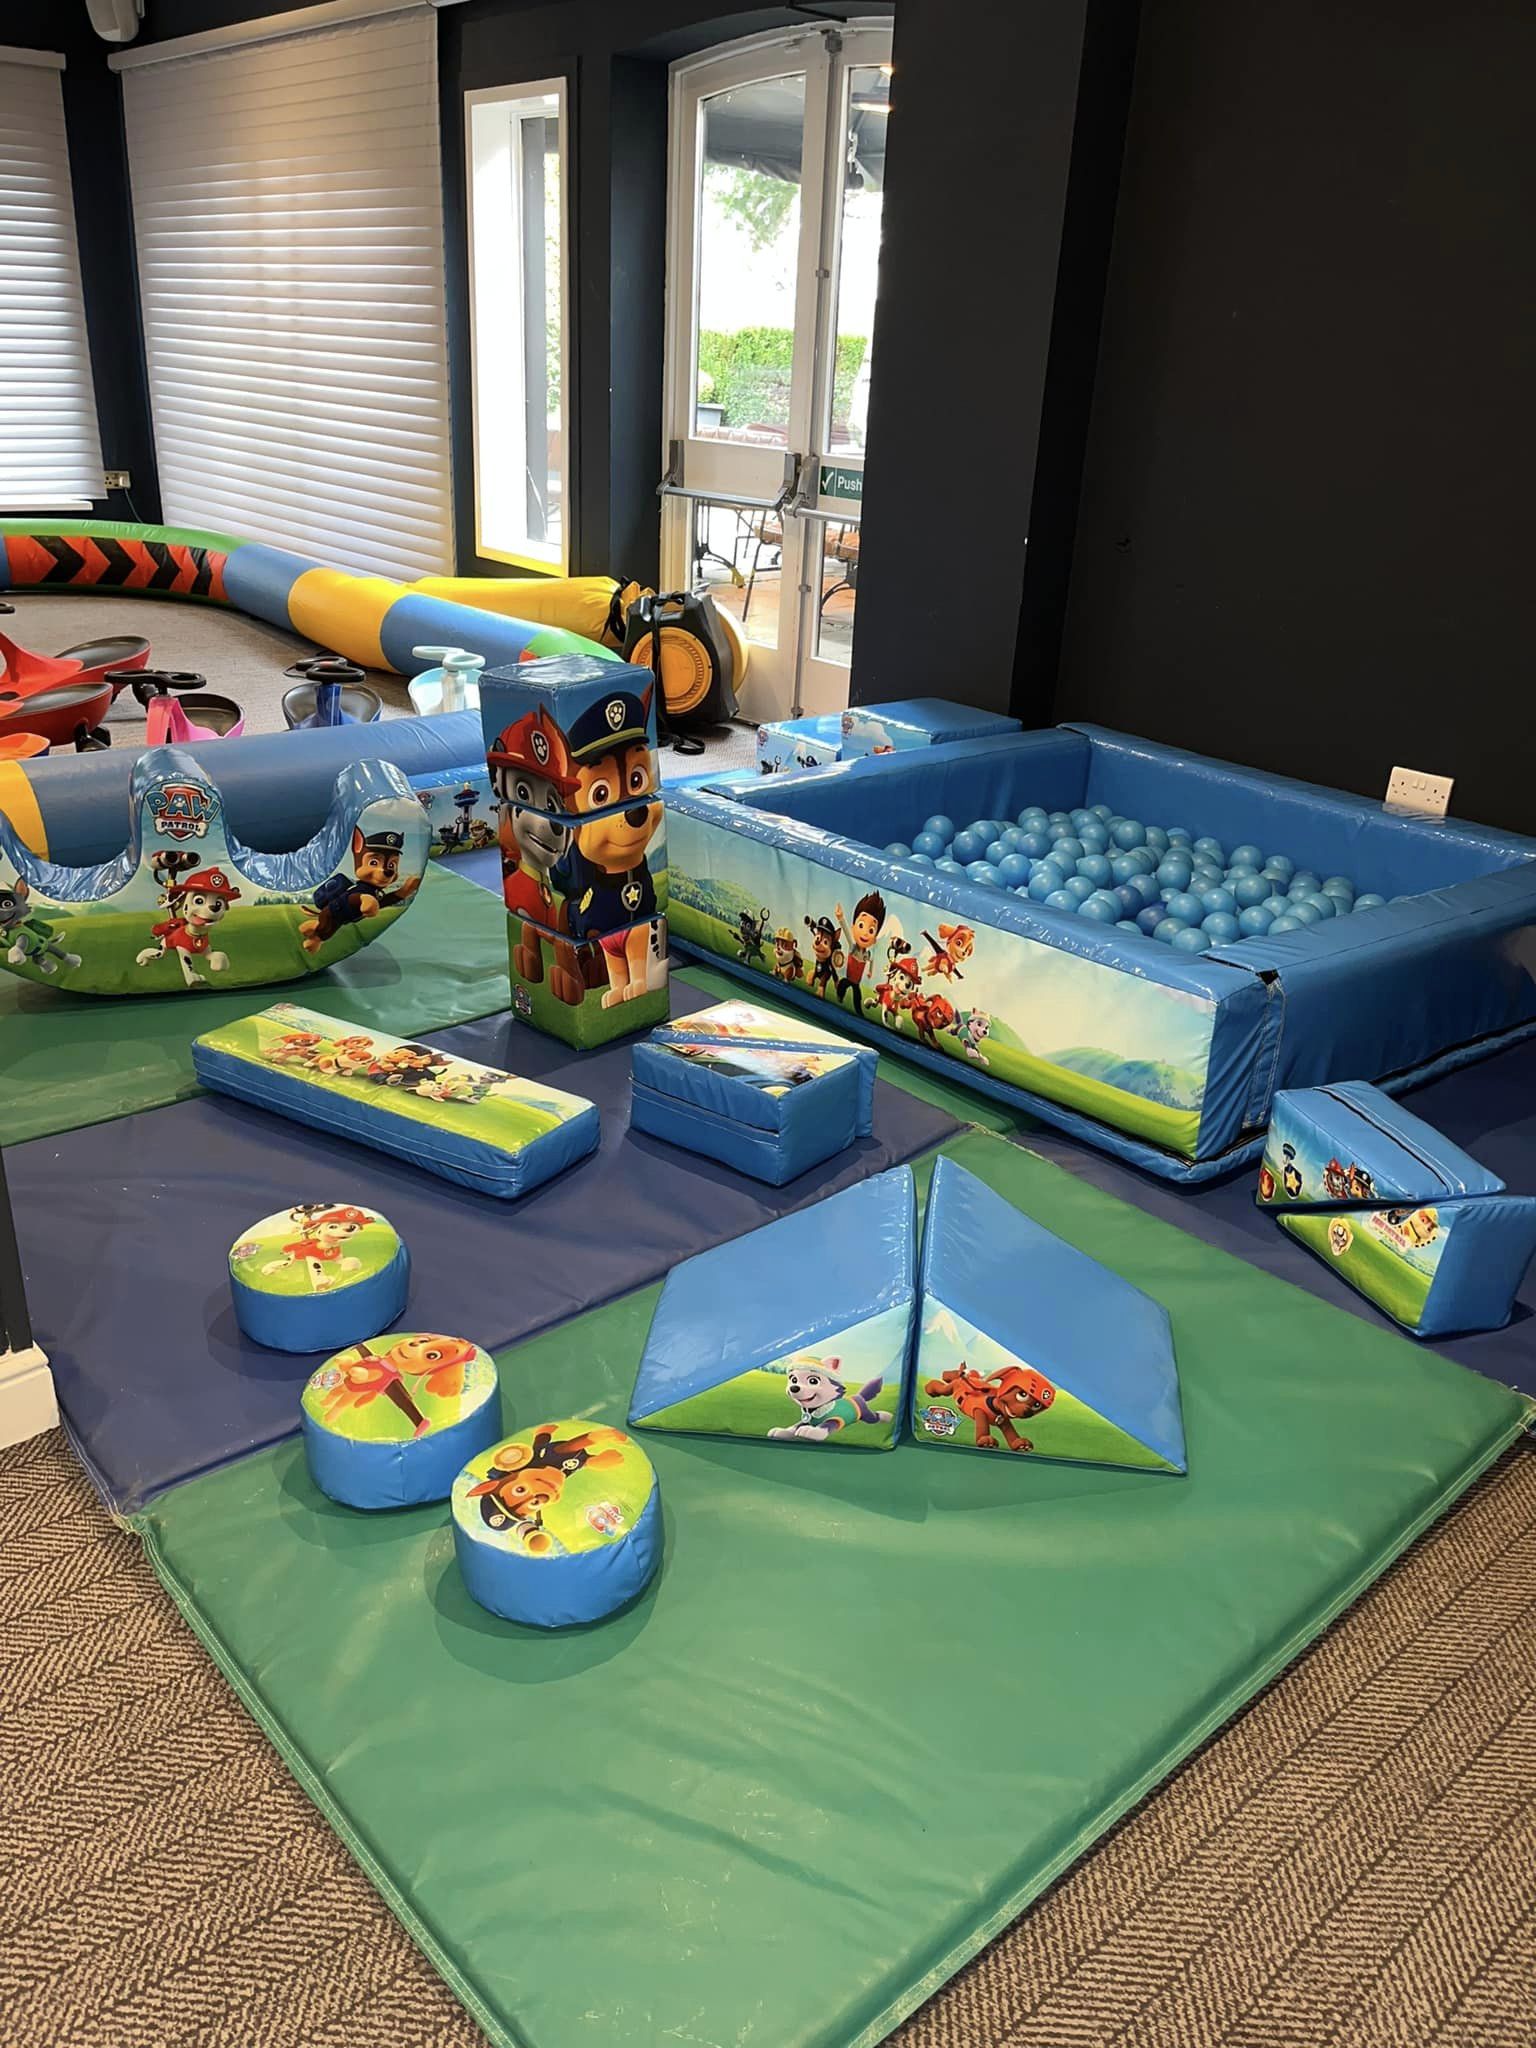 Paw Patrol soft play set up on hire in Cheshire